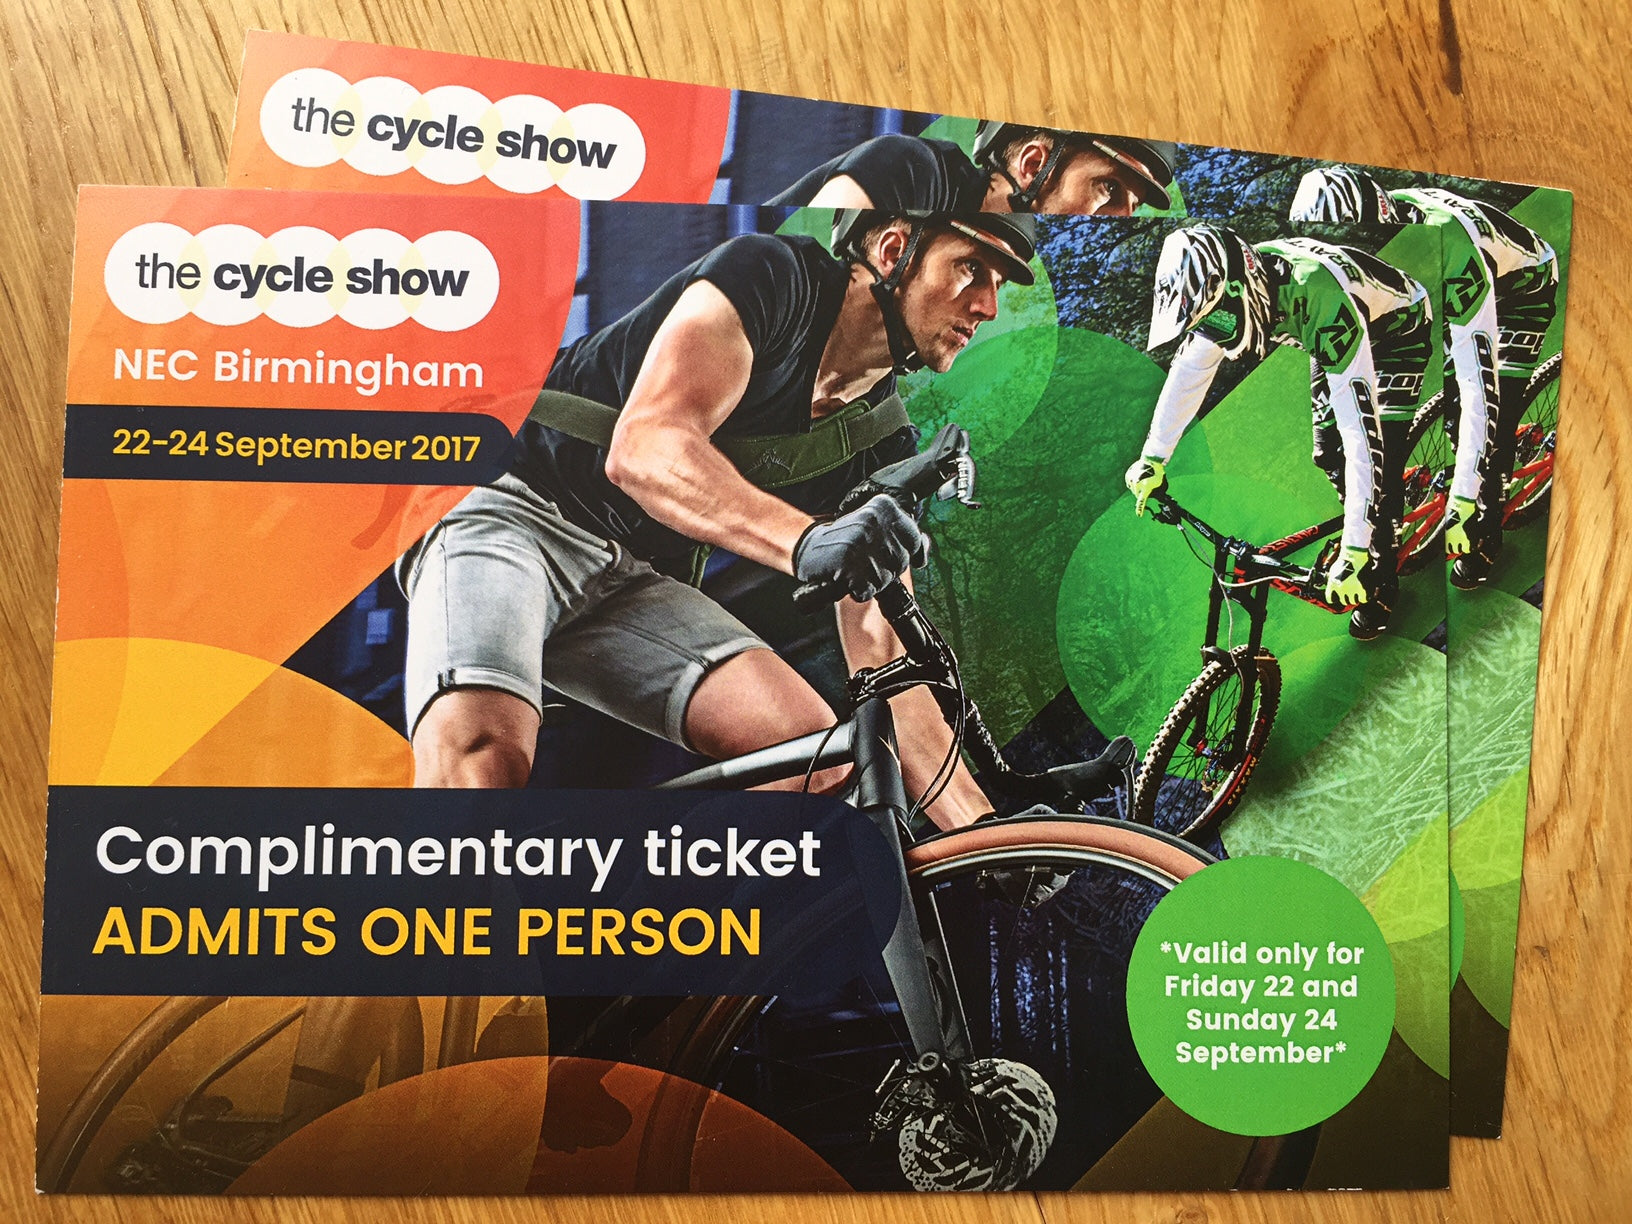 Win tickets to The Cycle Show